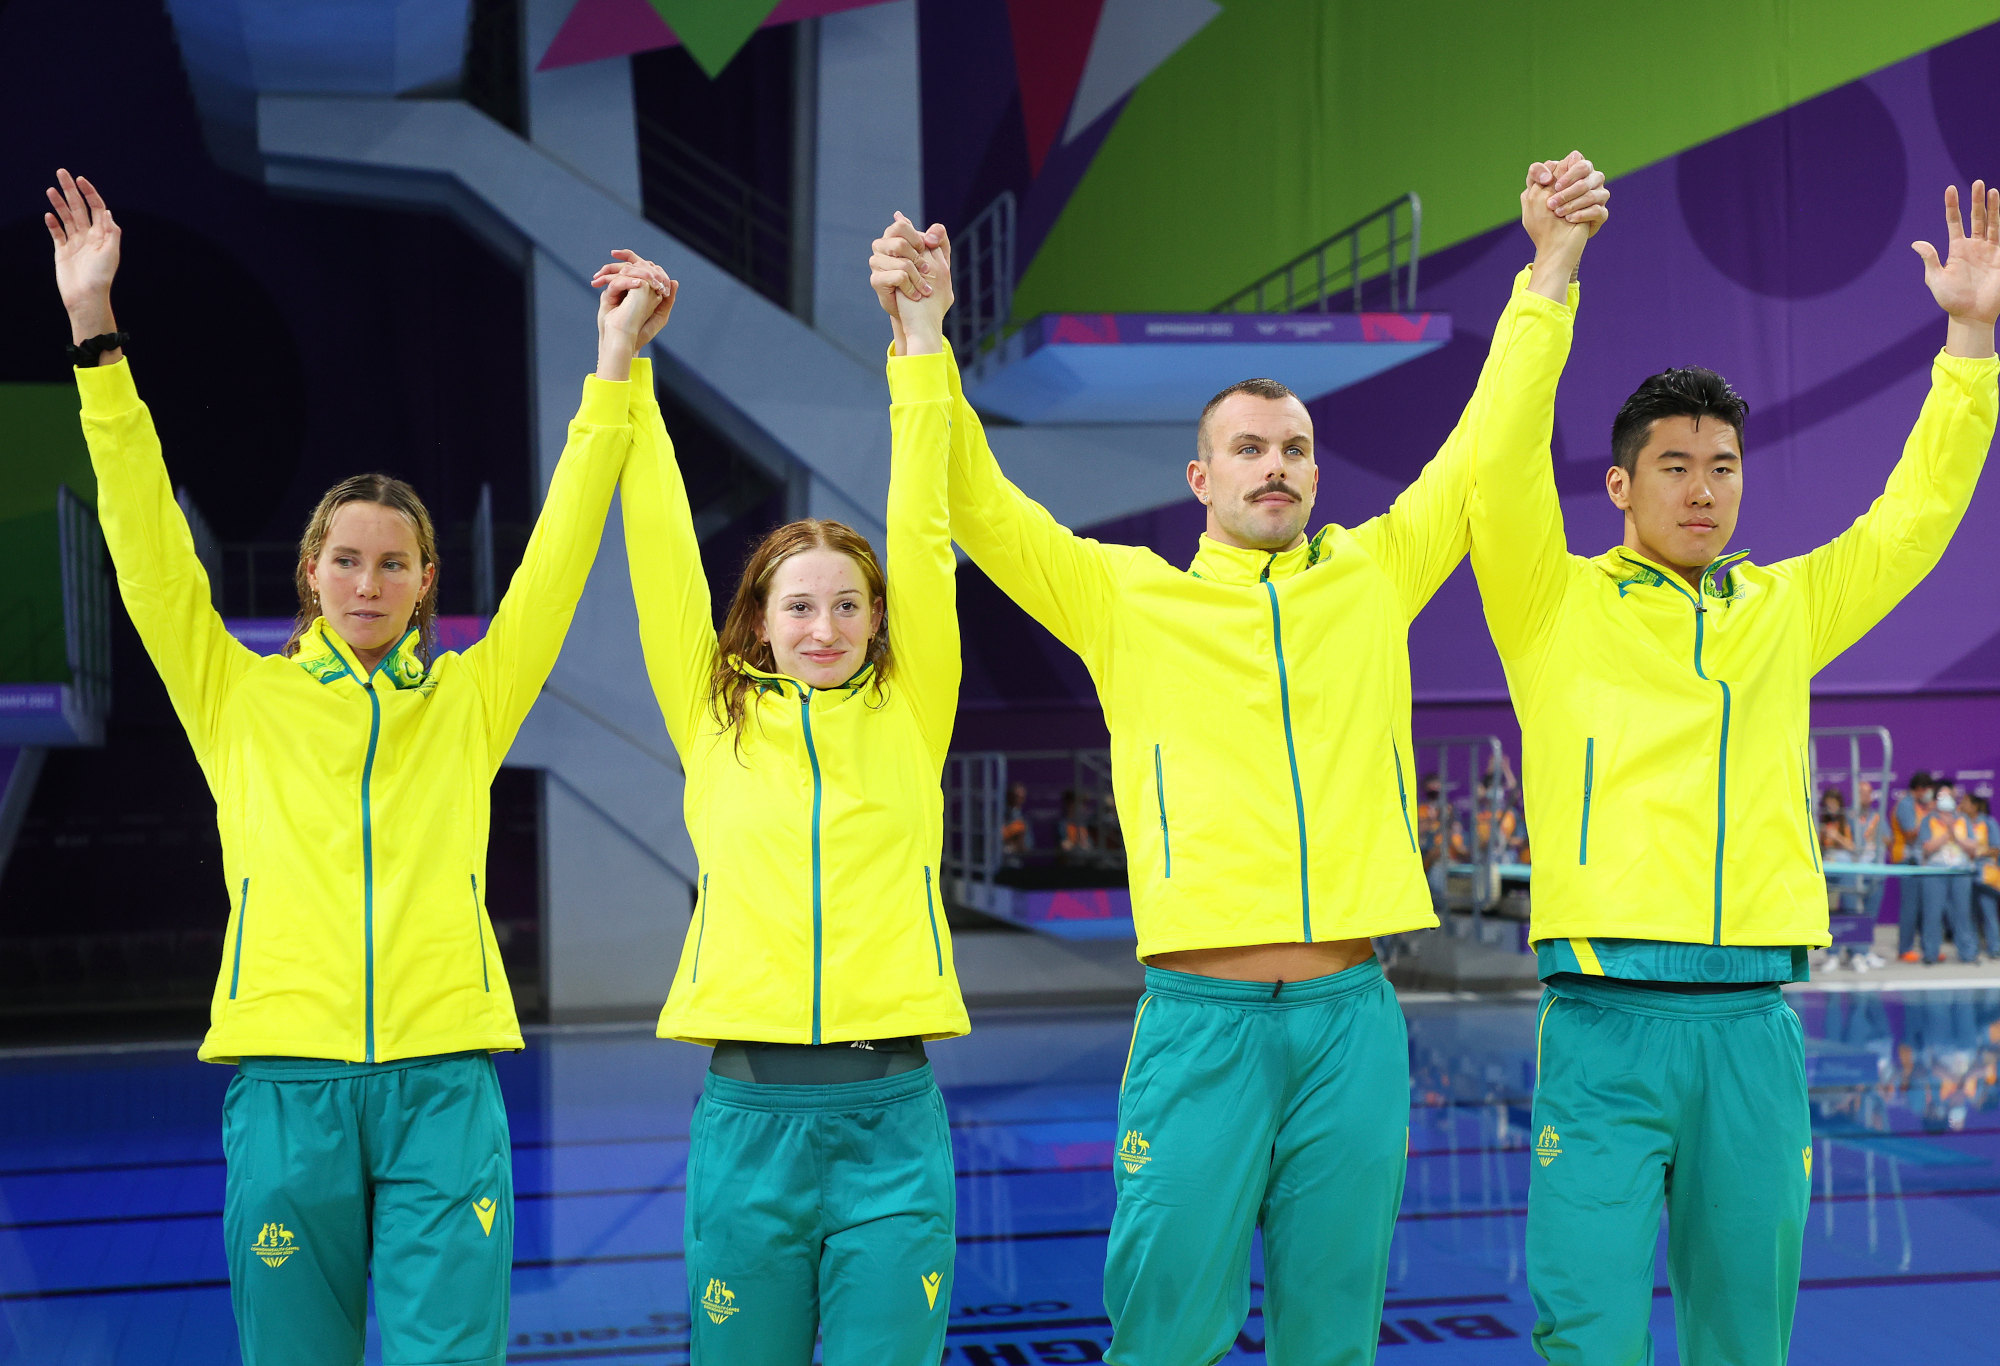 Gold medalists Emma McKeon, Mollie O'Callaghan, Kyle Chalmers and William Zu Yang of Team Australia celebrate.